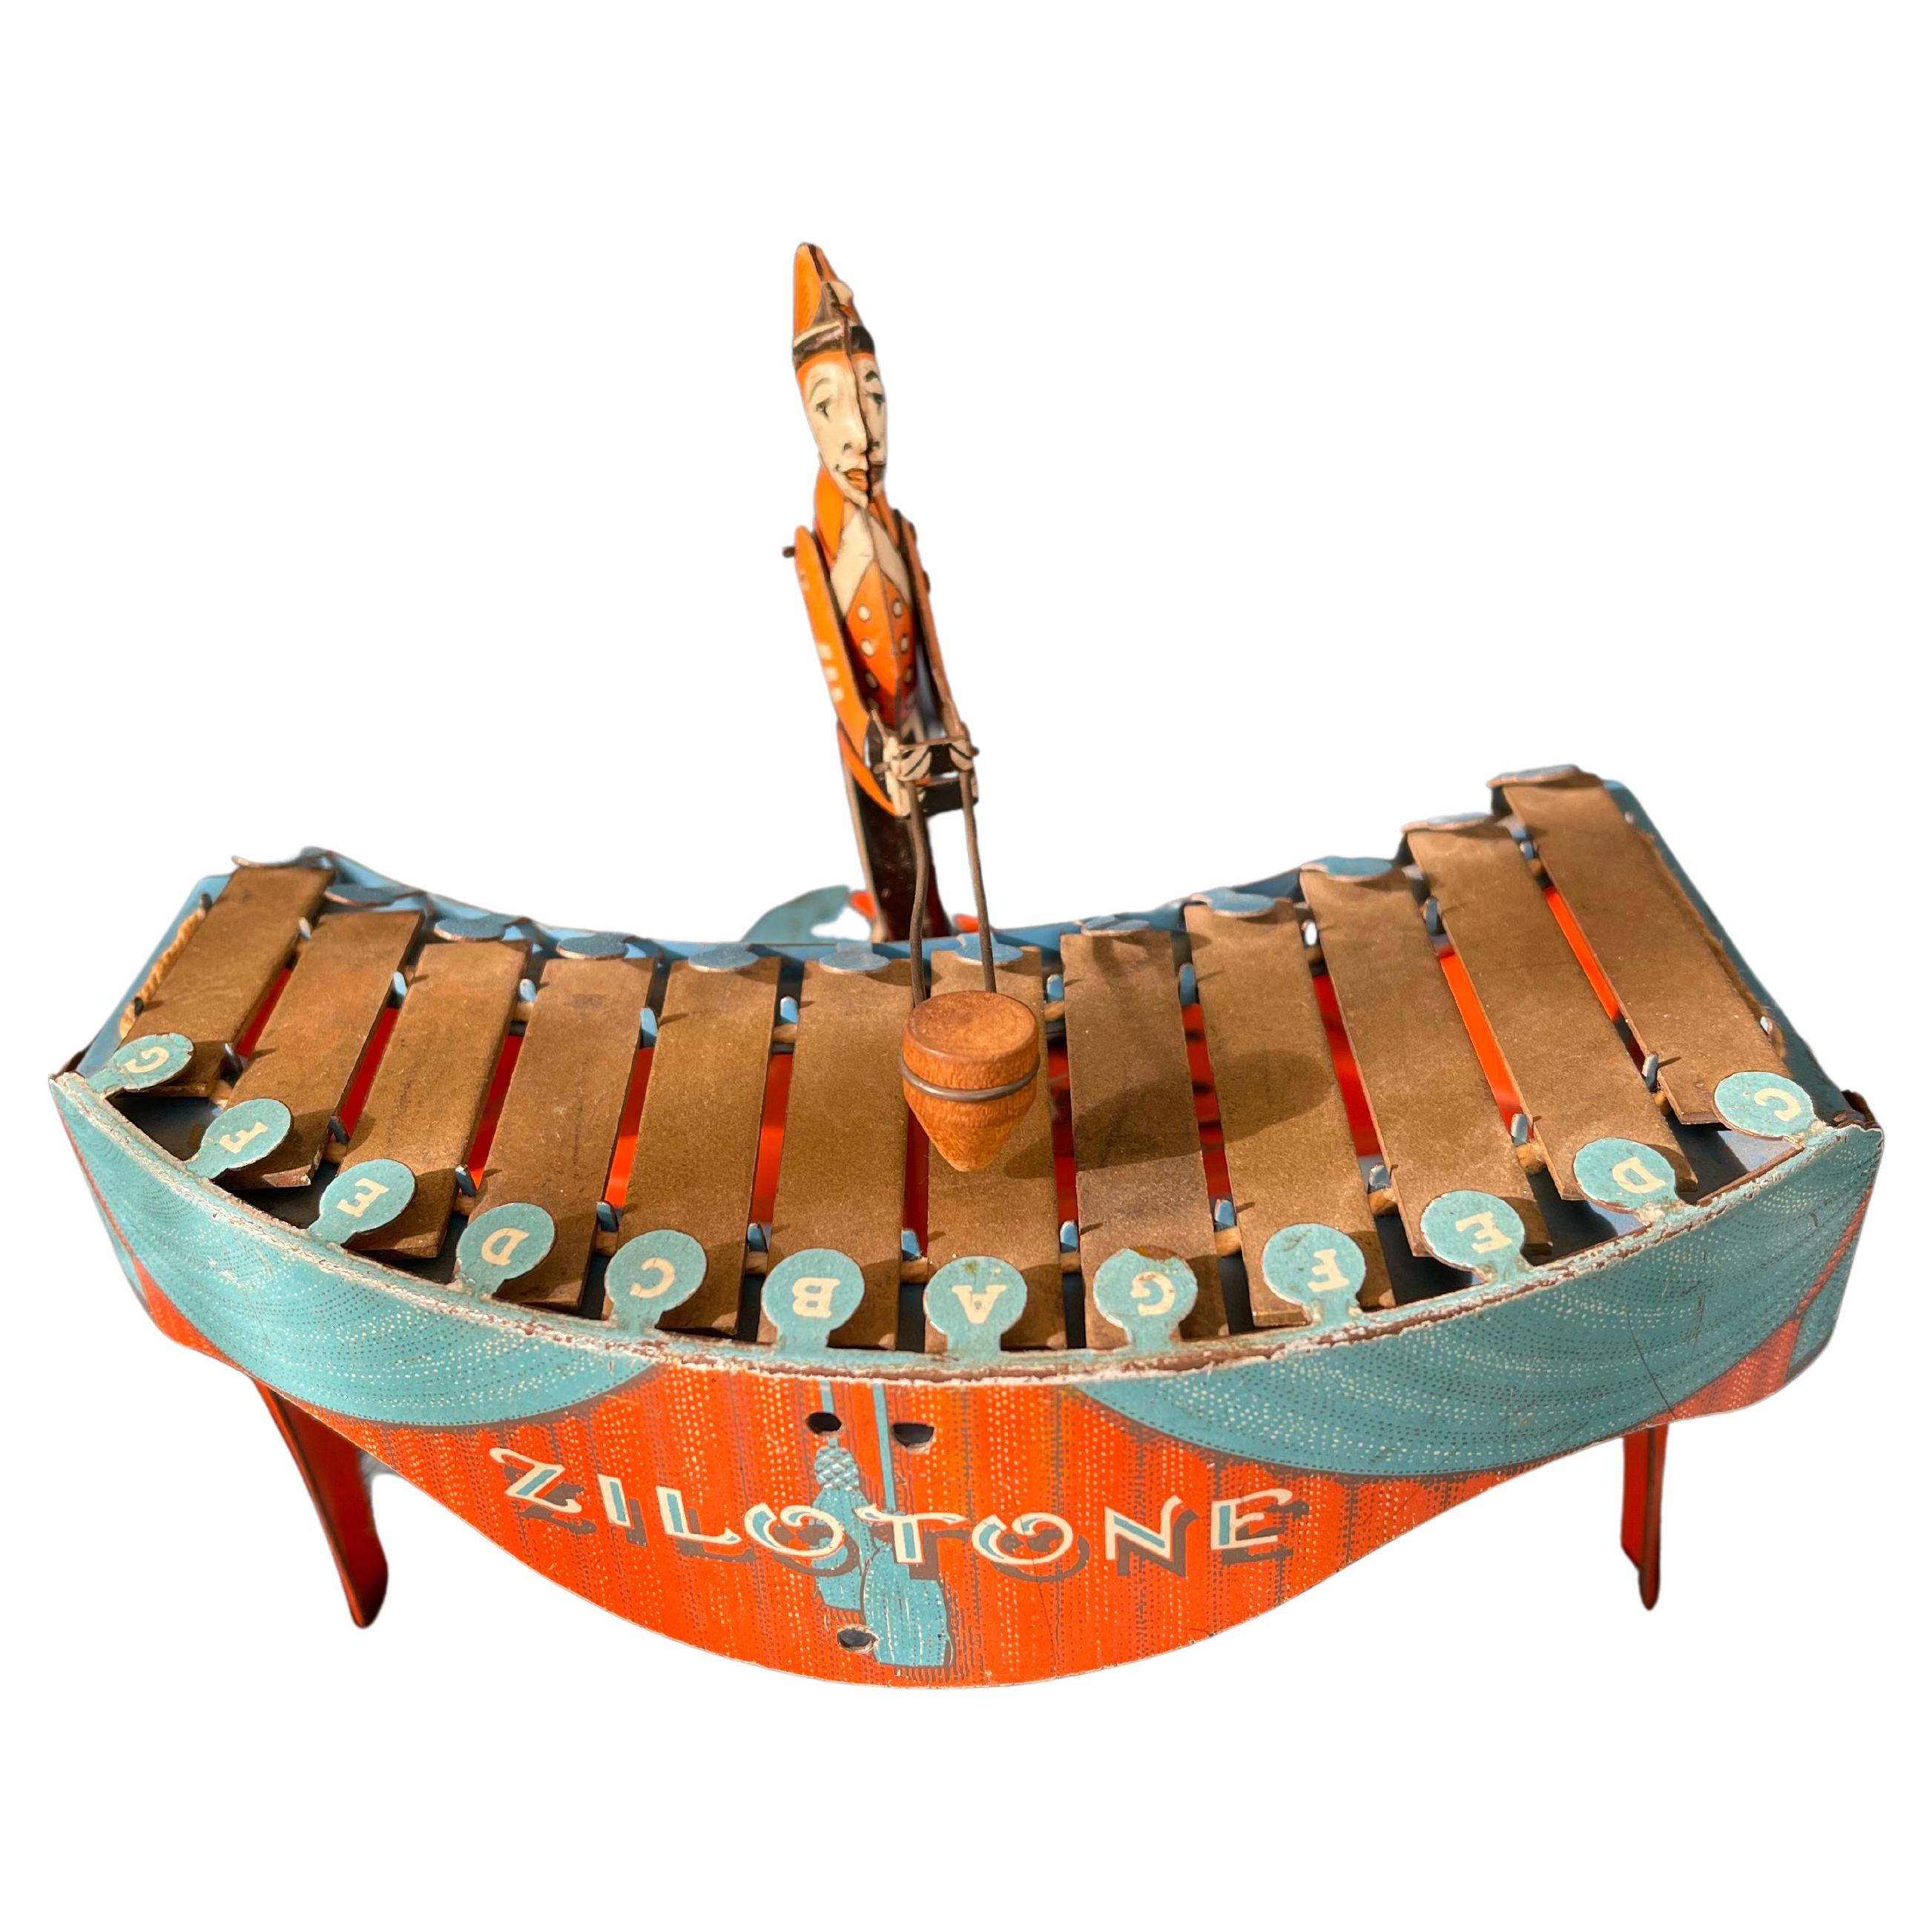 Wind Up Musical Toy 'Zilotone', Clown Playing Xylophone, Wolverine Co. 1930's